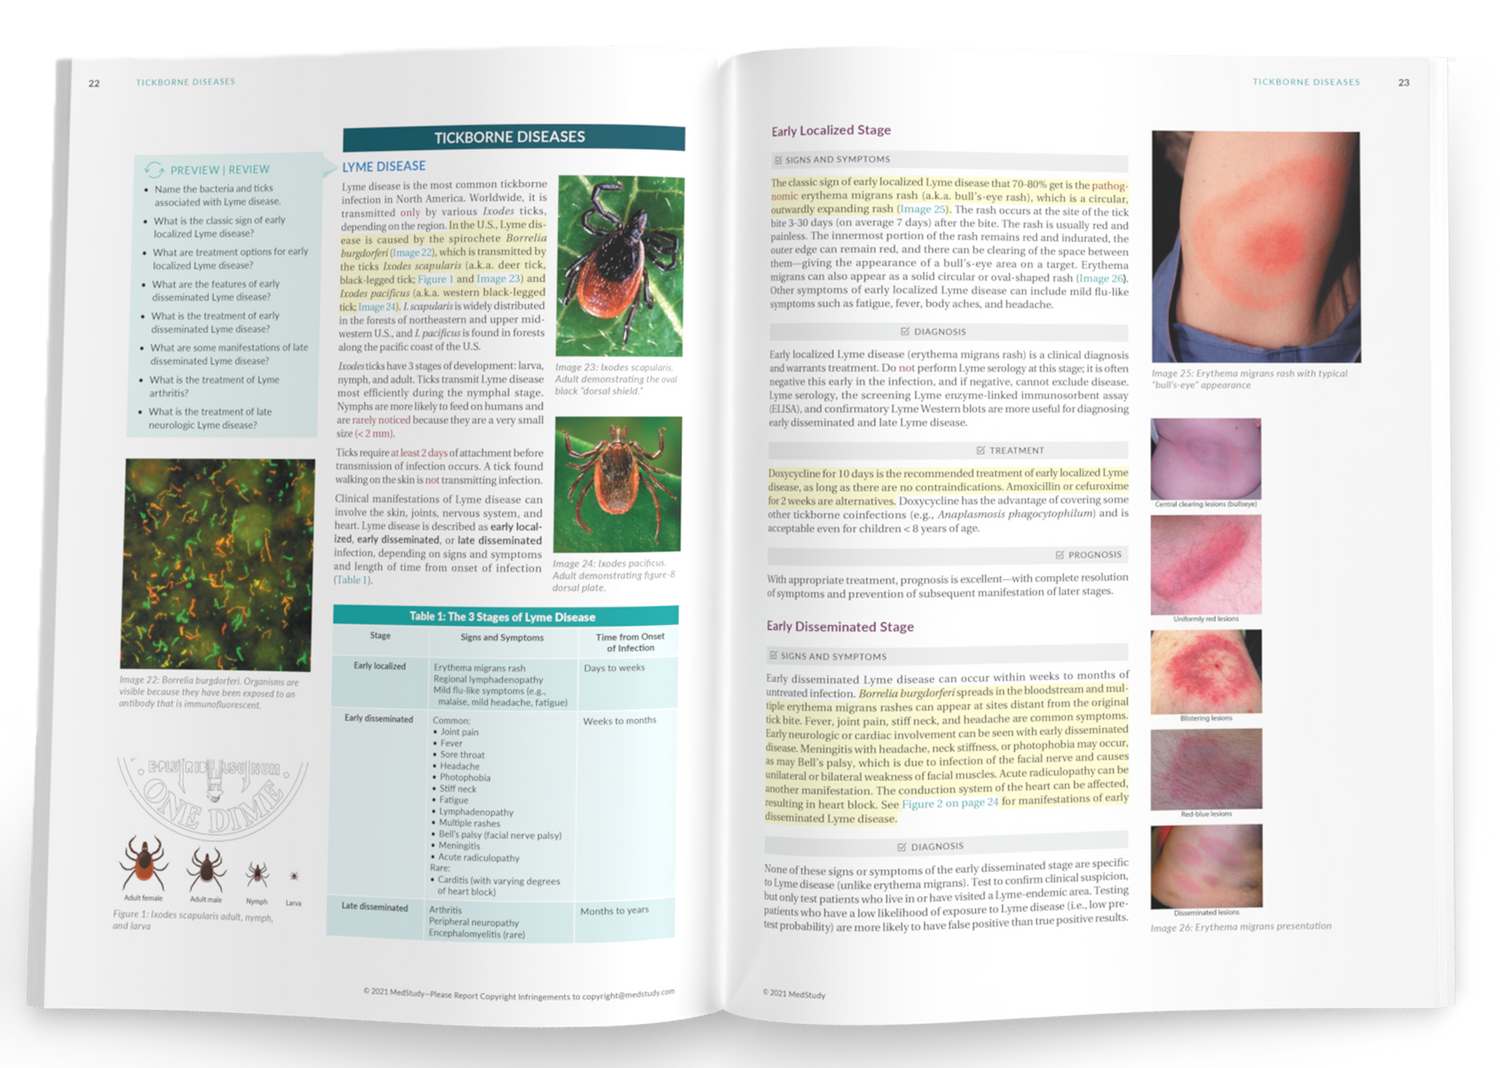 A Medical Student core book is open to a two-page spread showing content from the Tickborne Diseases topic